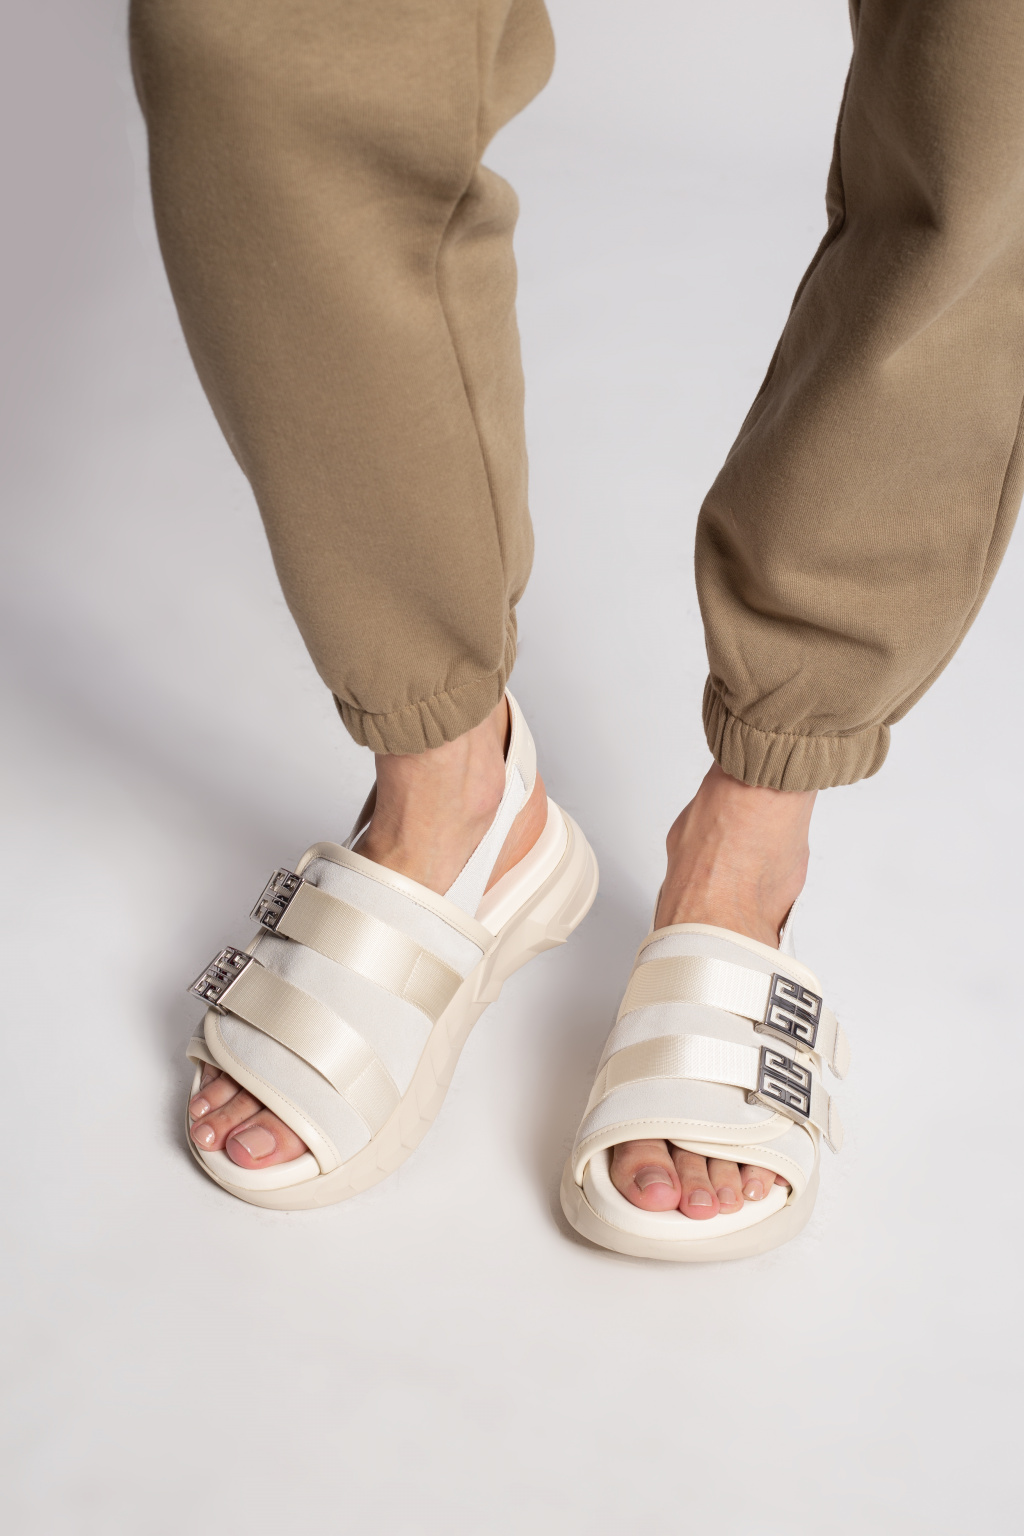 Givenchy 'Marshmallow' sandals | Women's Shoes | Vitkac